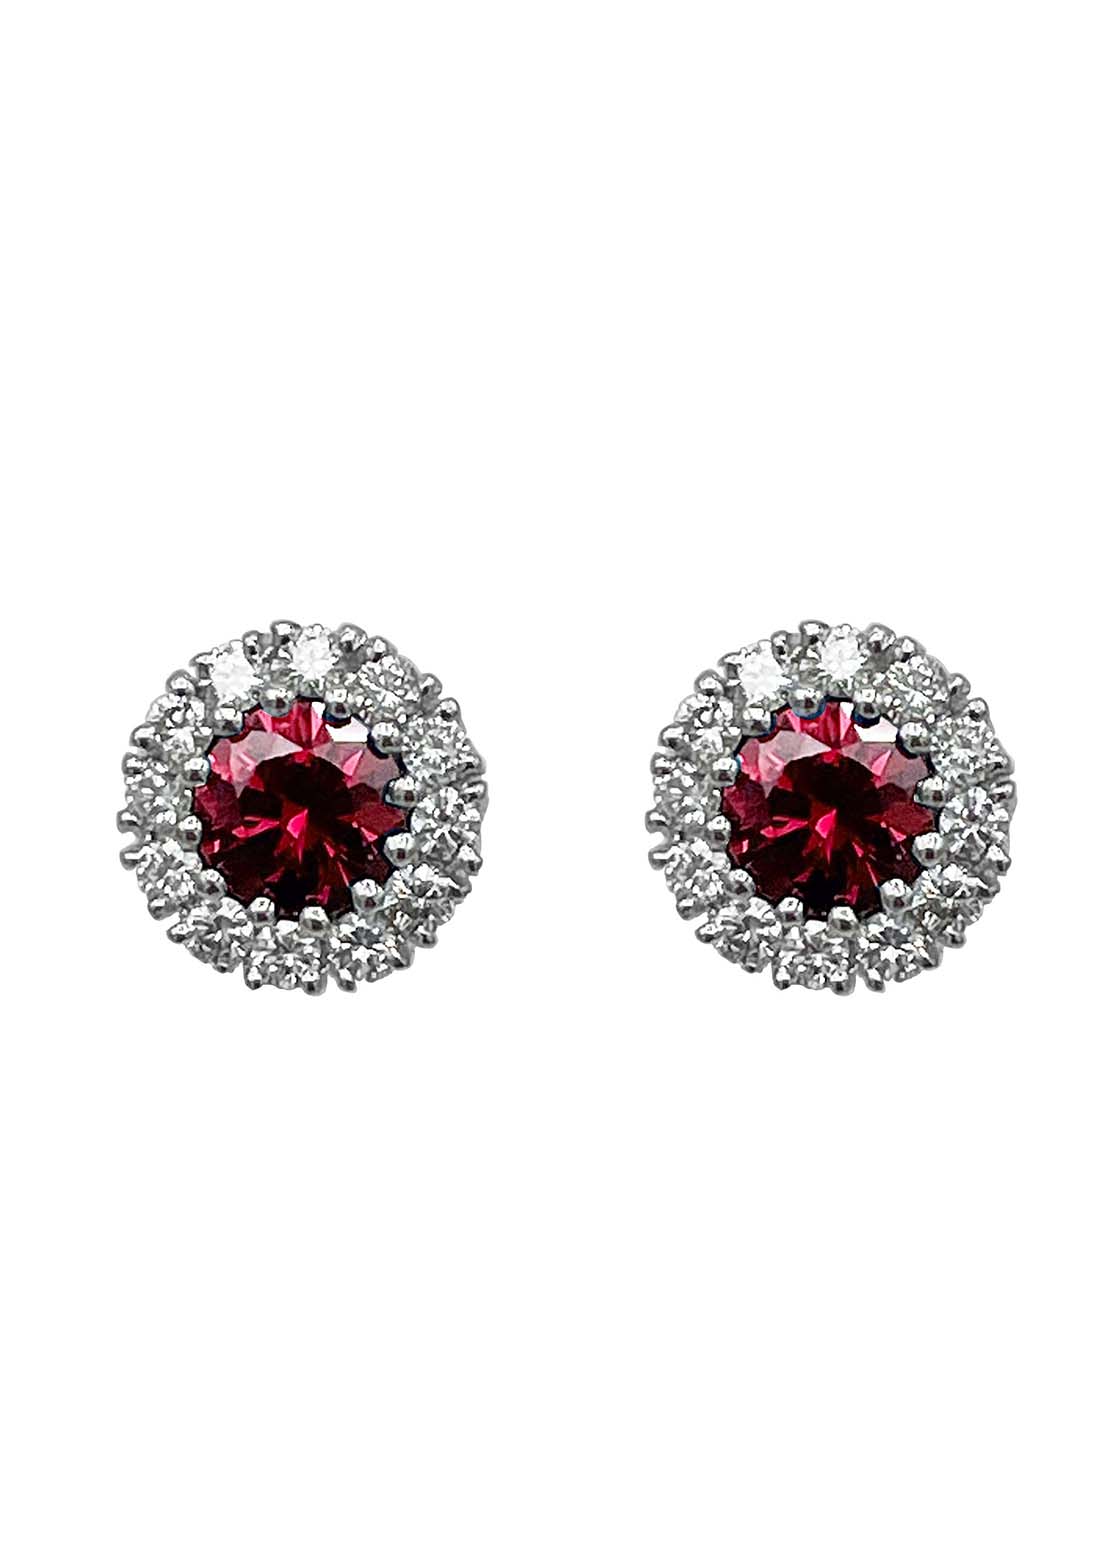 18k White Gold Stud Earrings with Ruby and Diamonds Image